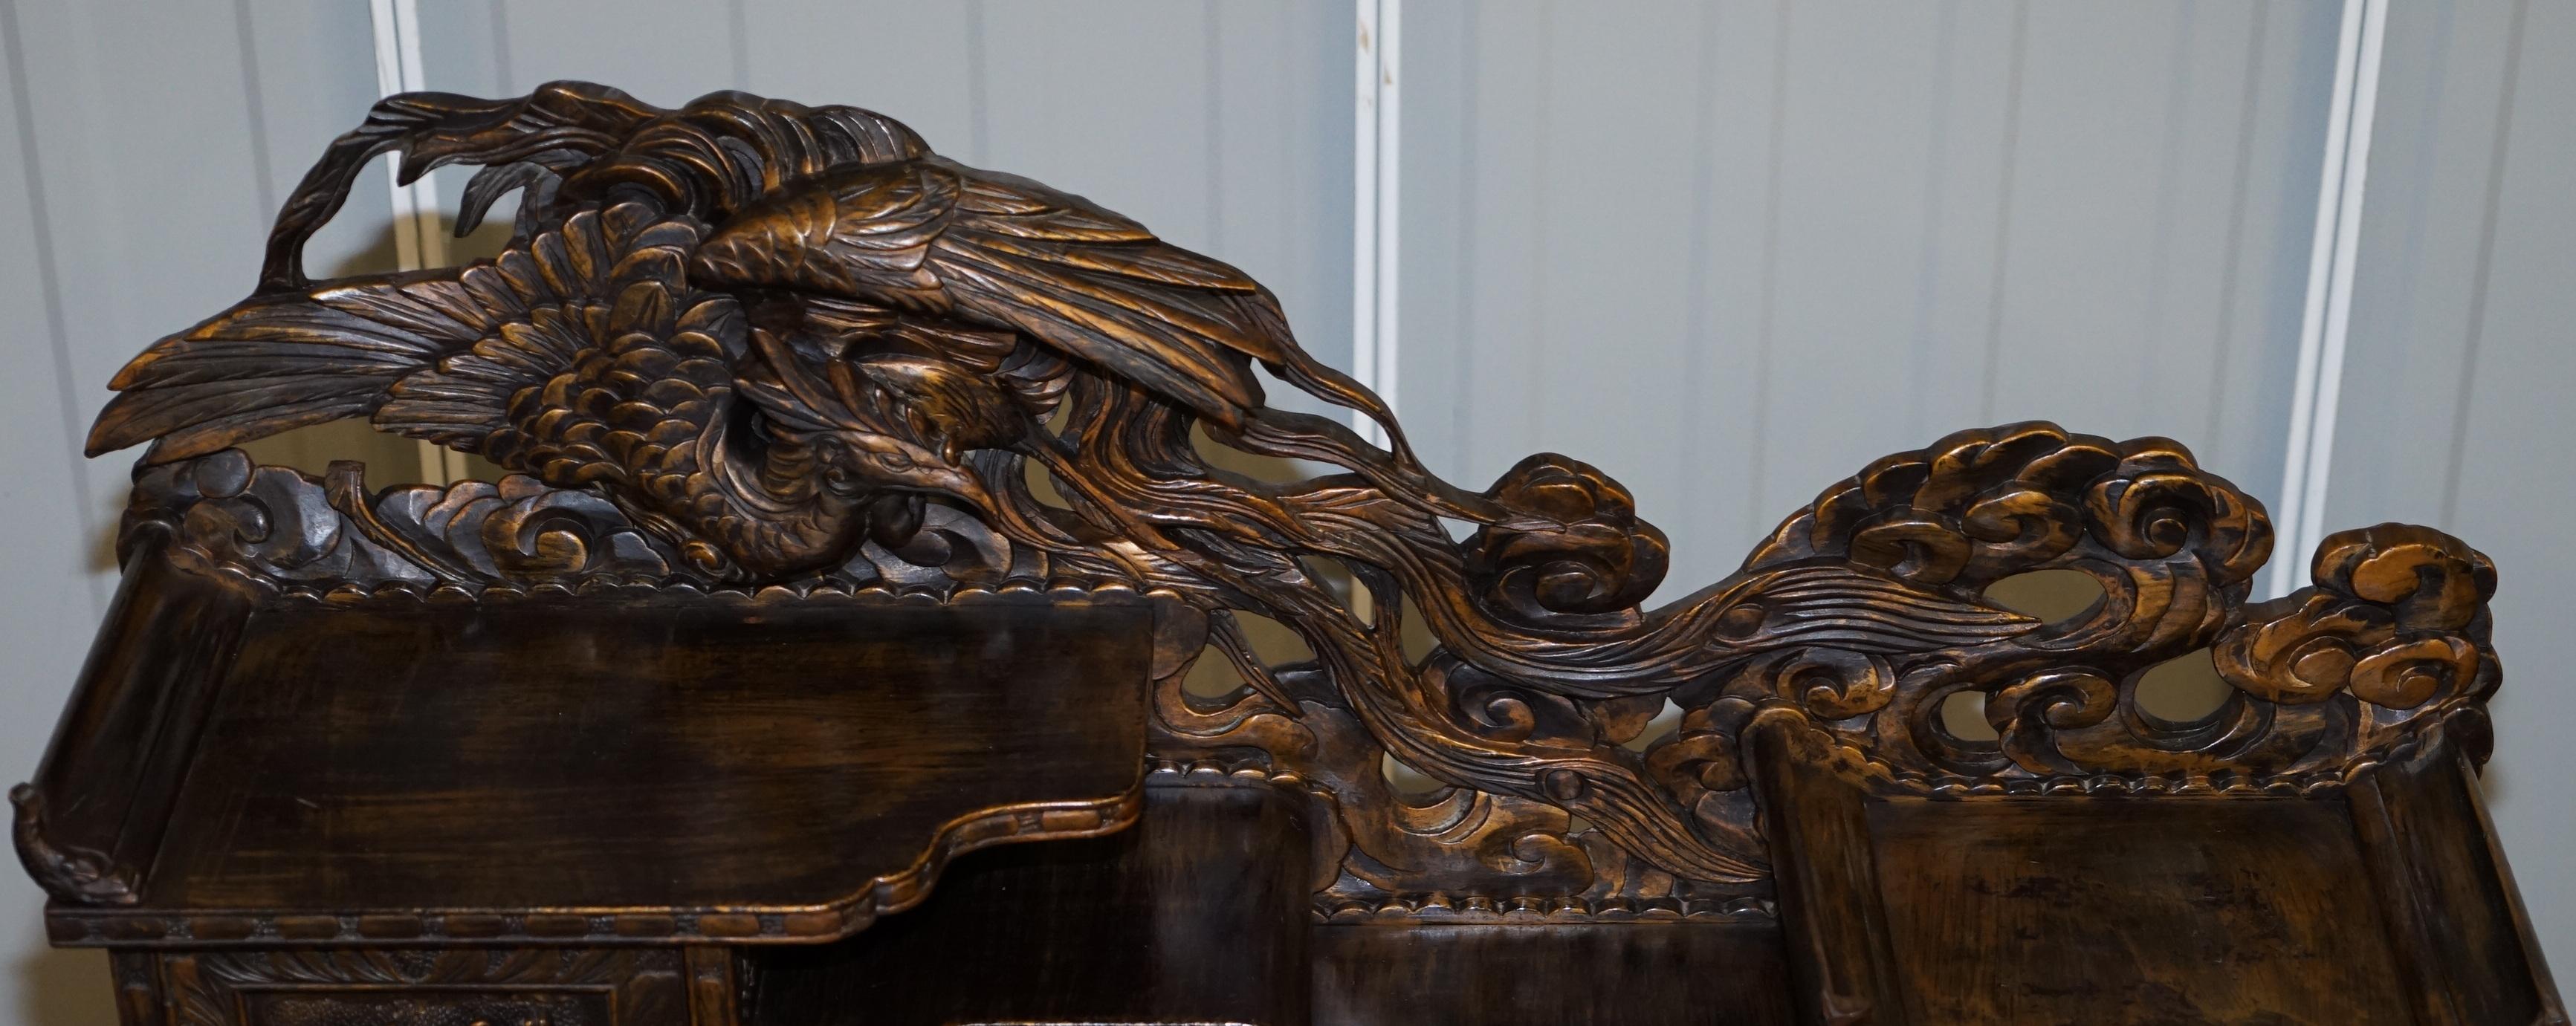 Hand-Crafted Rare Chinese Export Dragons Phoenix Bird Writing Table Desk and Matching Chair